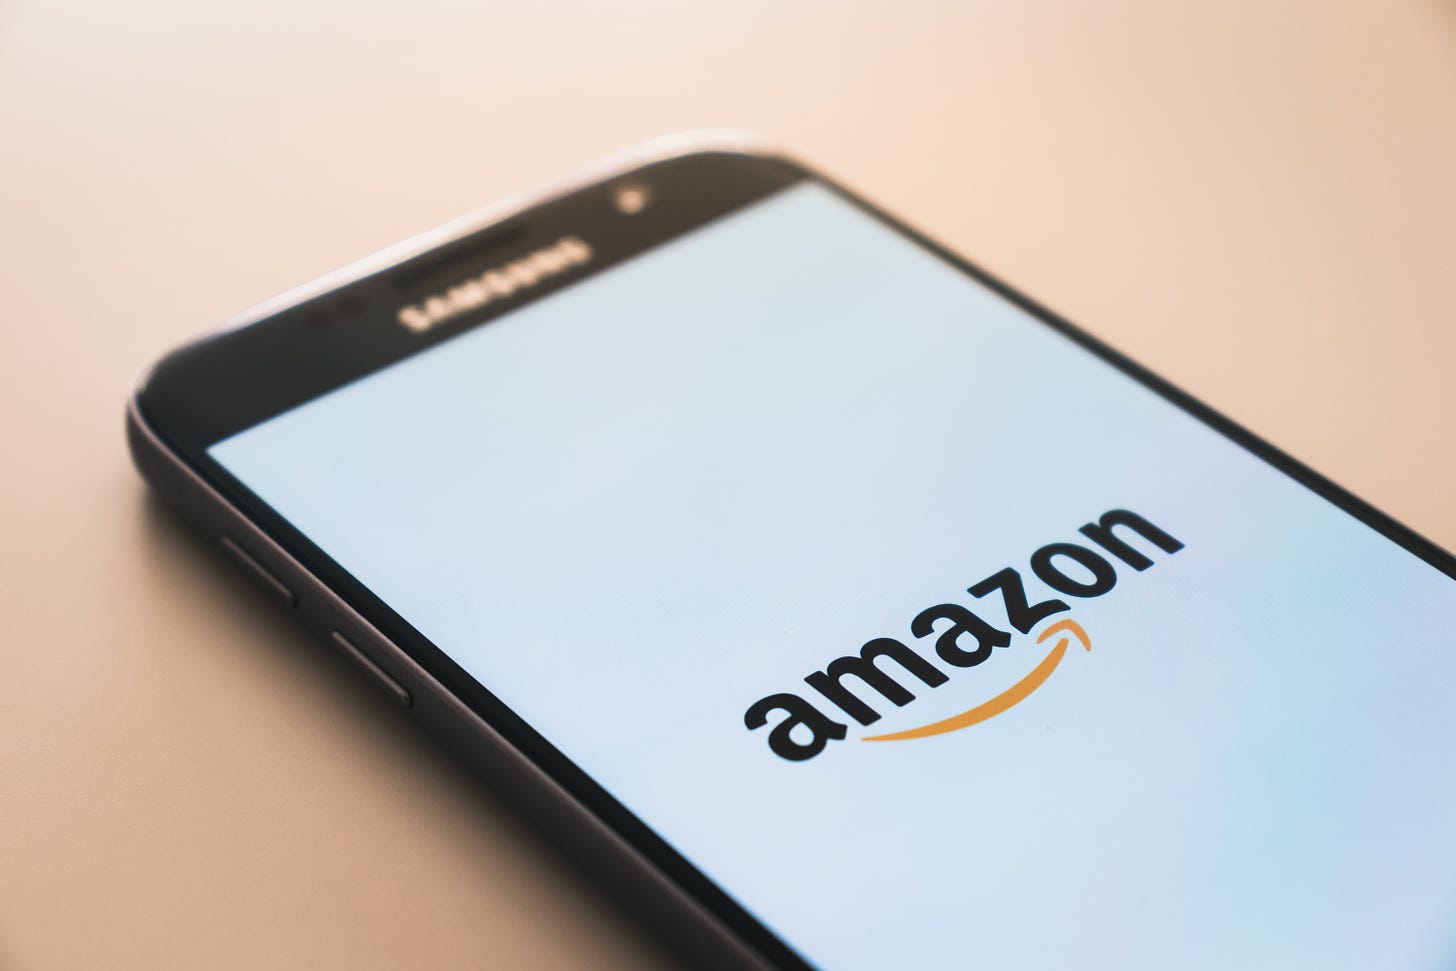 Smartphone showing the Amazon logo on its screen